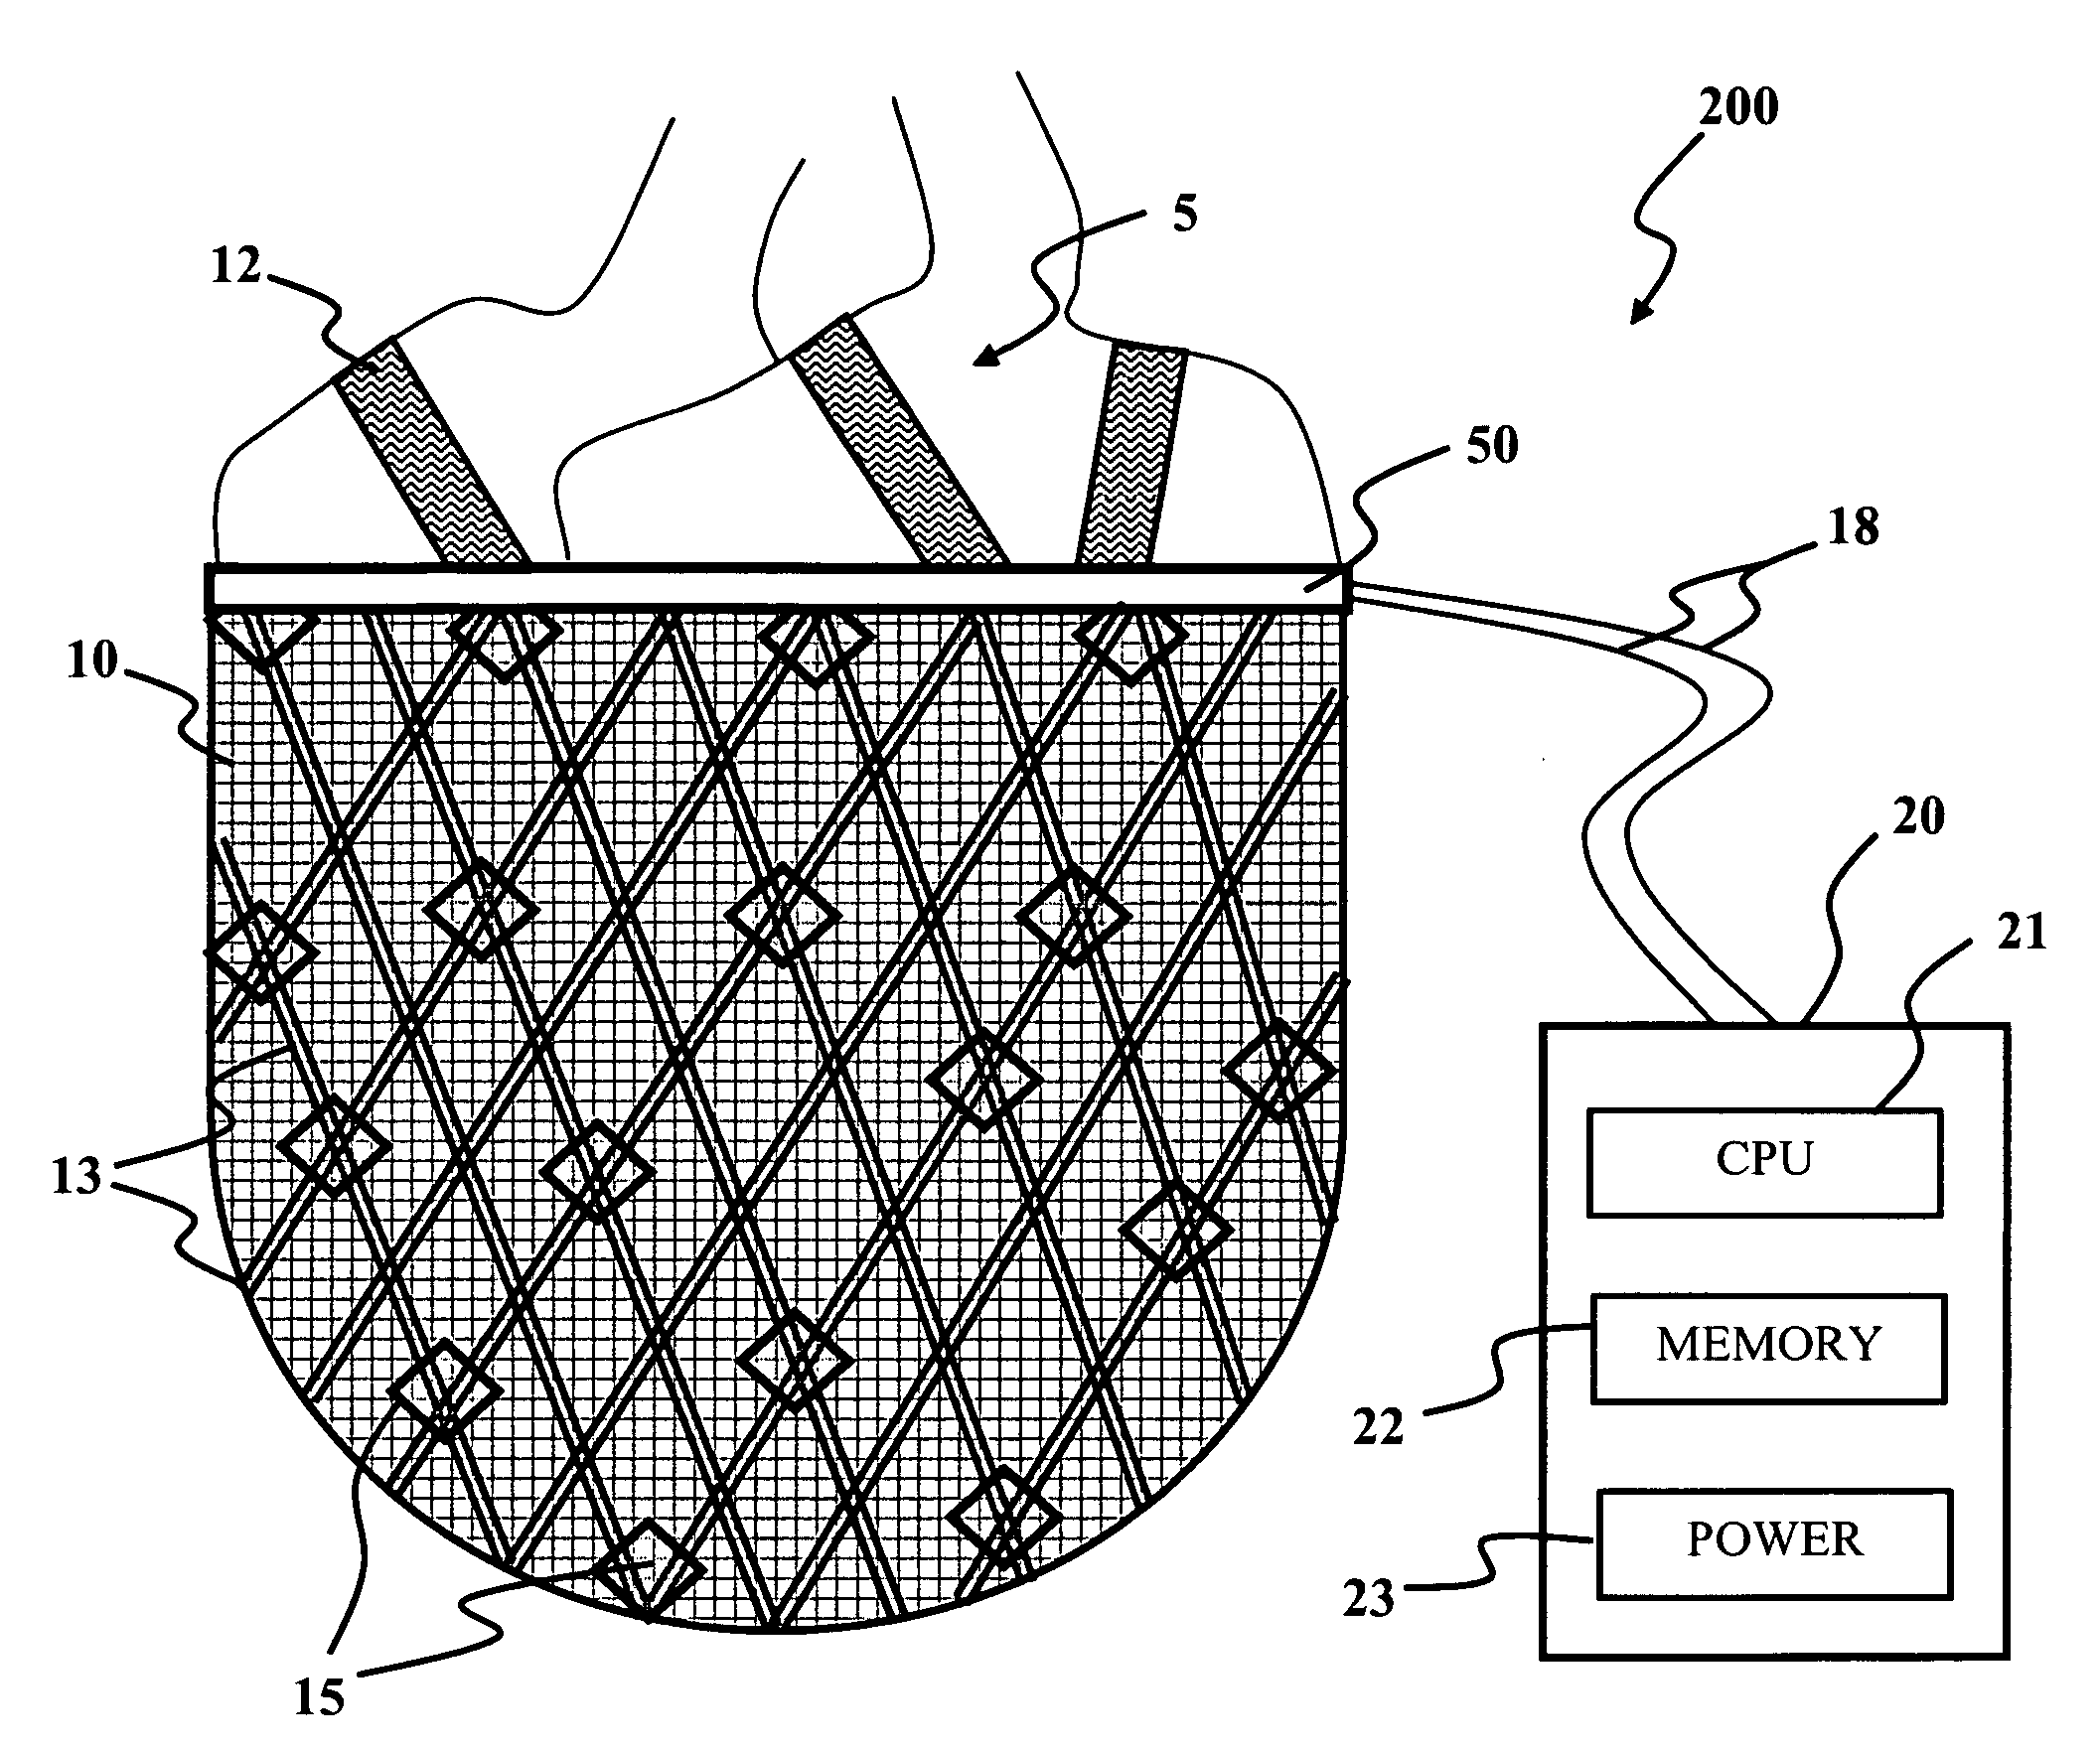 Electromechanical machine-based artificial muscles, bio-valves and related devices